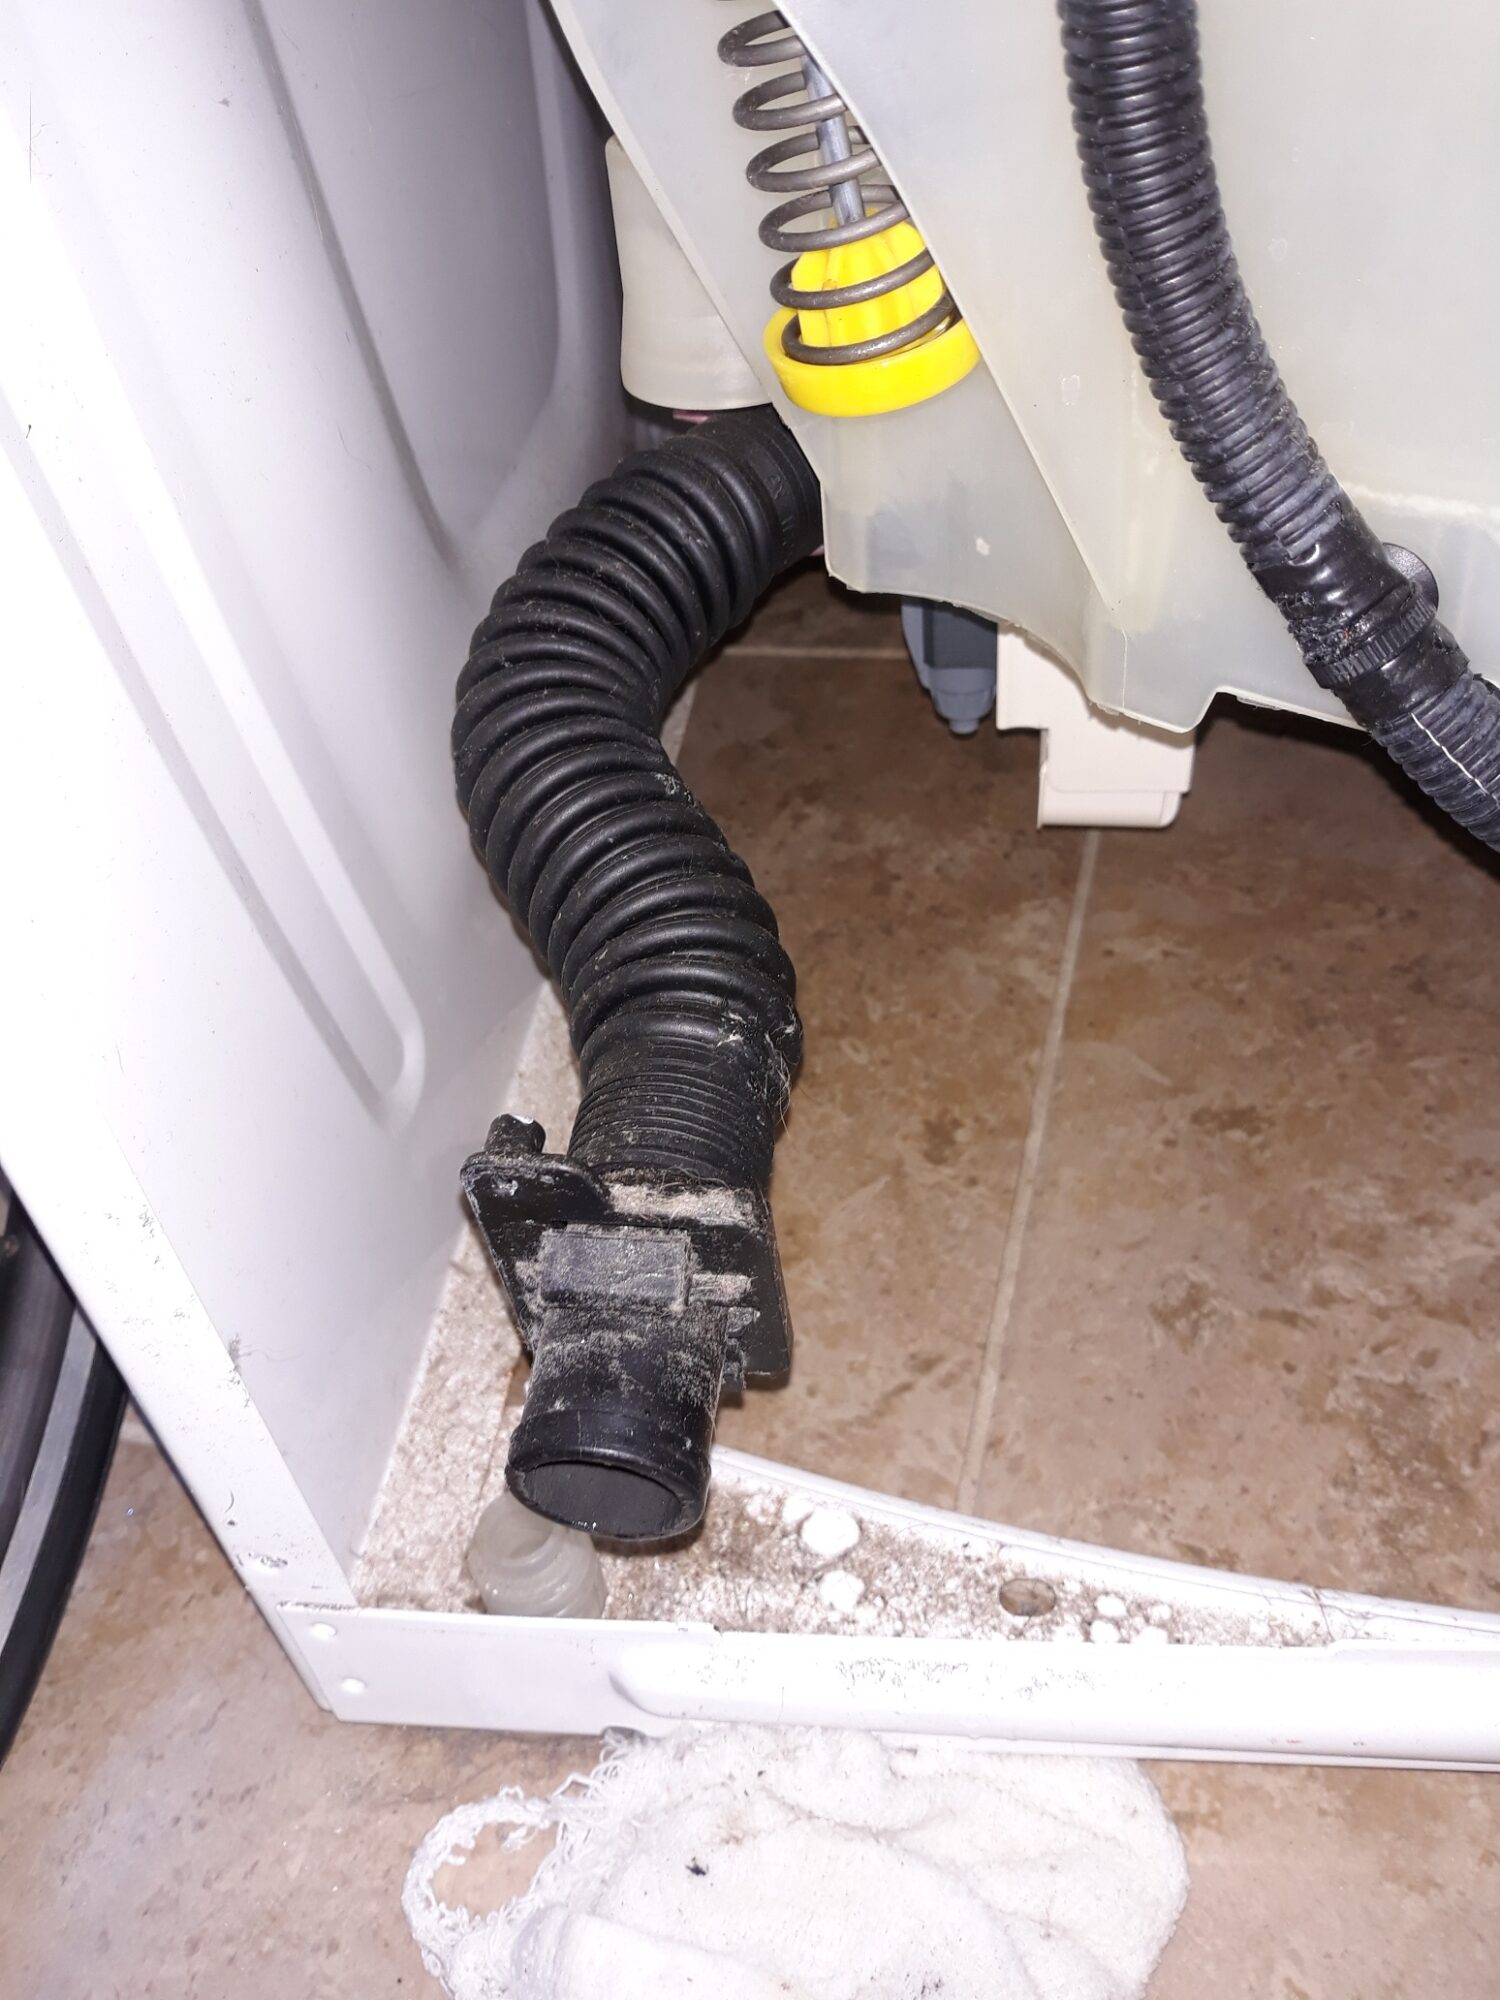 appliance repair washer repair repair required replacement of the broken drain hose with a new part hazelnut ln astatula fl 34705